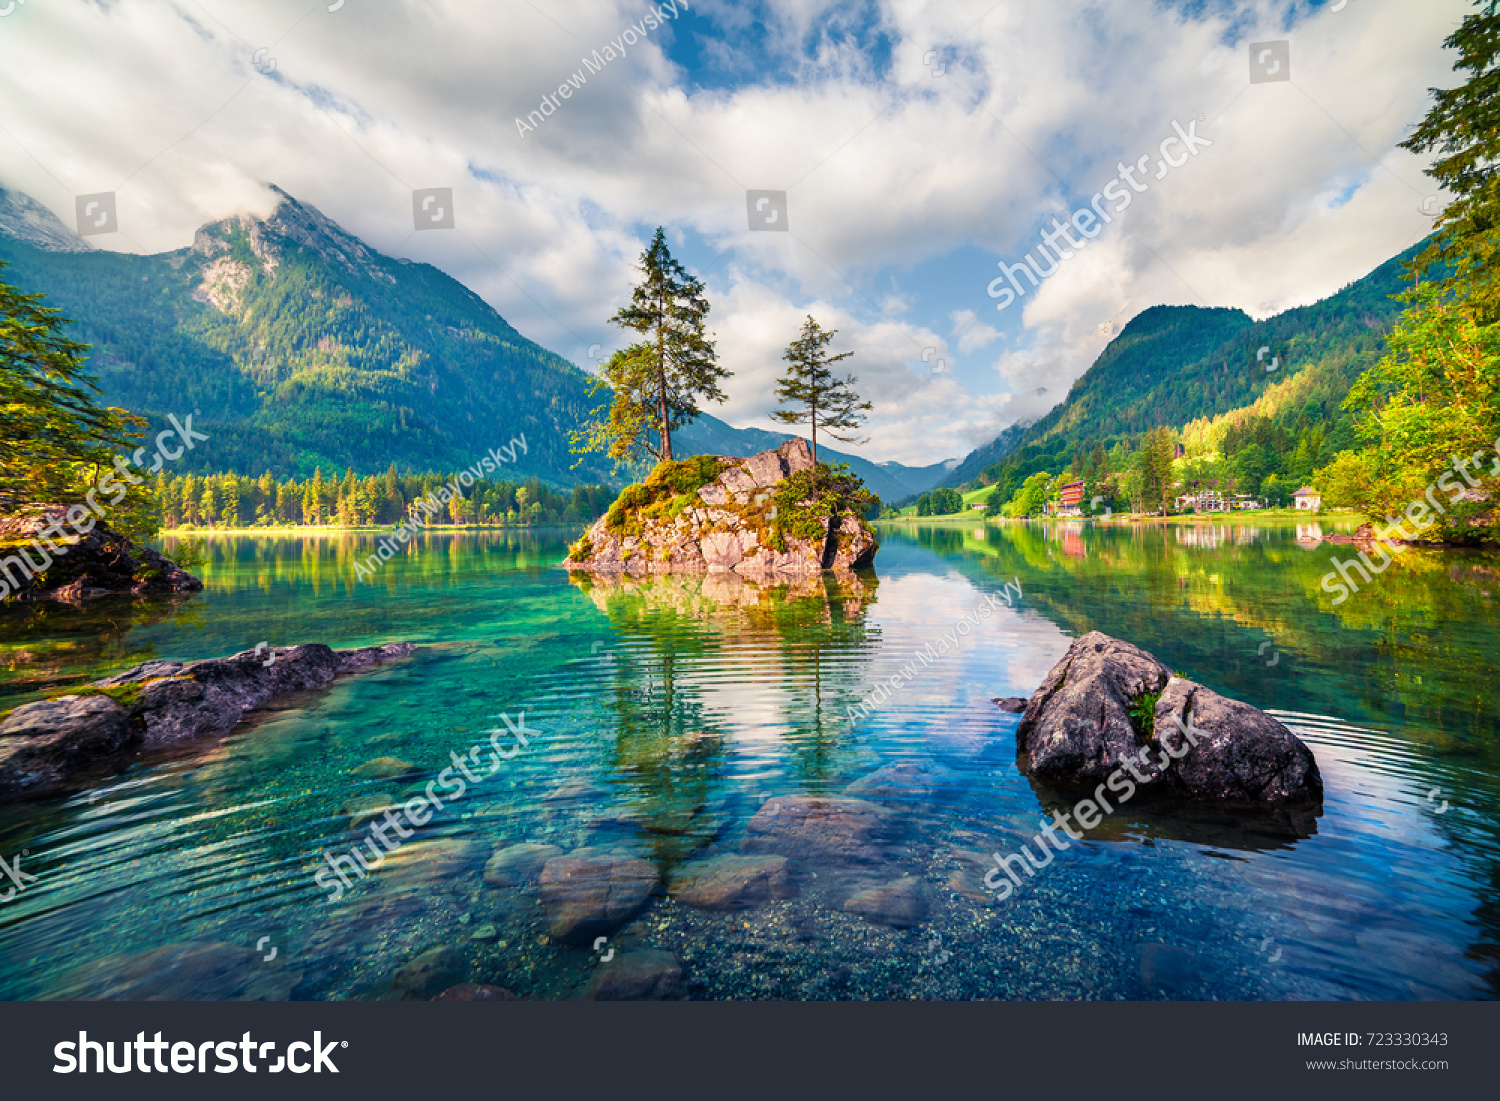 Magnificent summer scene of Hintersee lake. Colorful morning view of Austrian Alps, Salzburg-Umgebung district, Austria, Europe. Beauty of nature concept background. #723330343